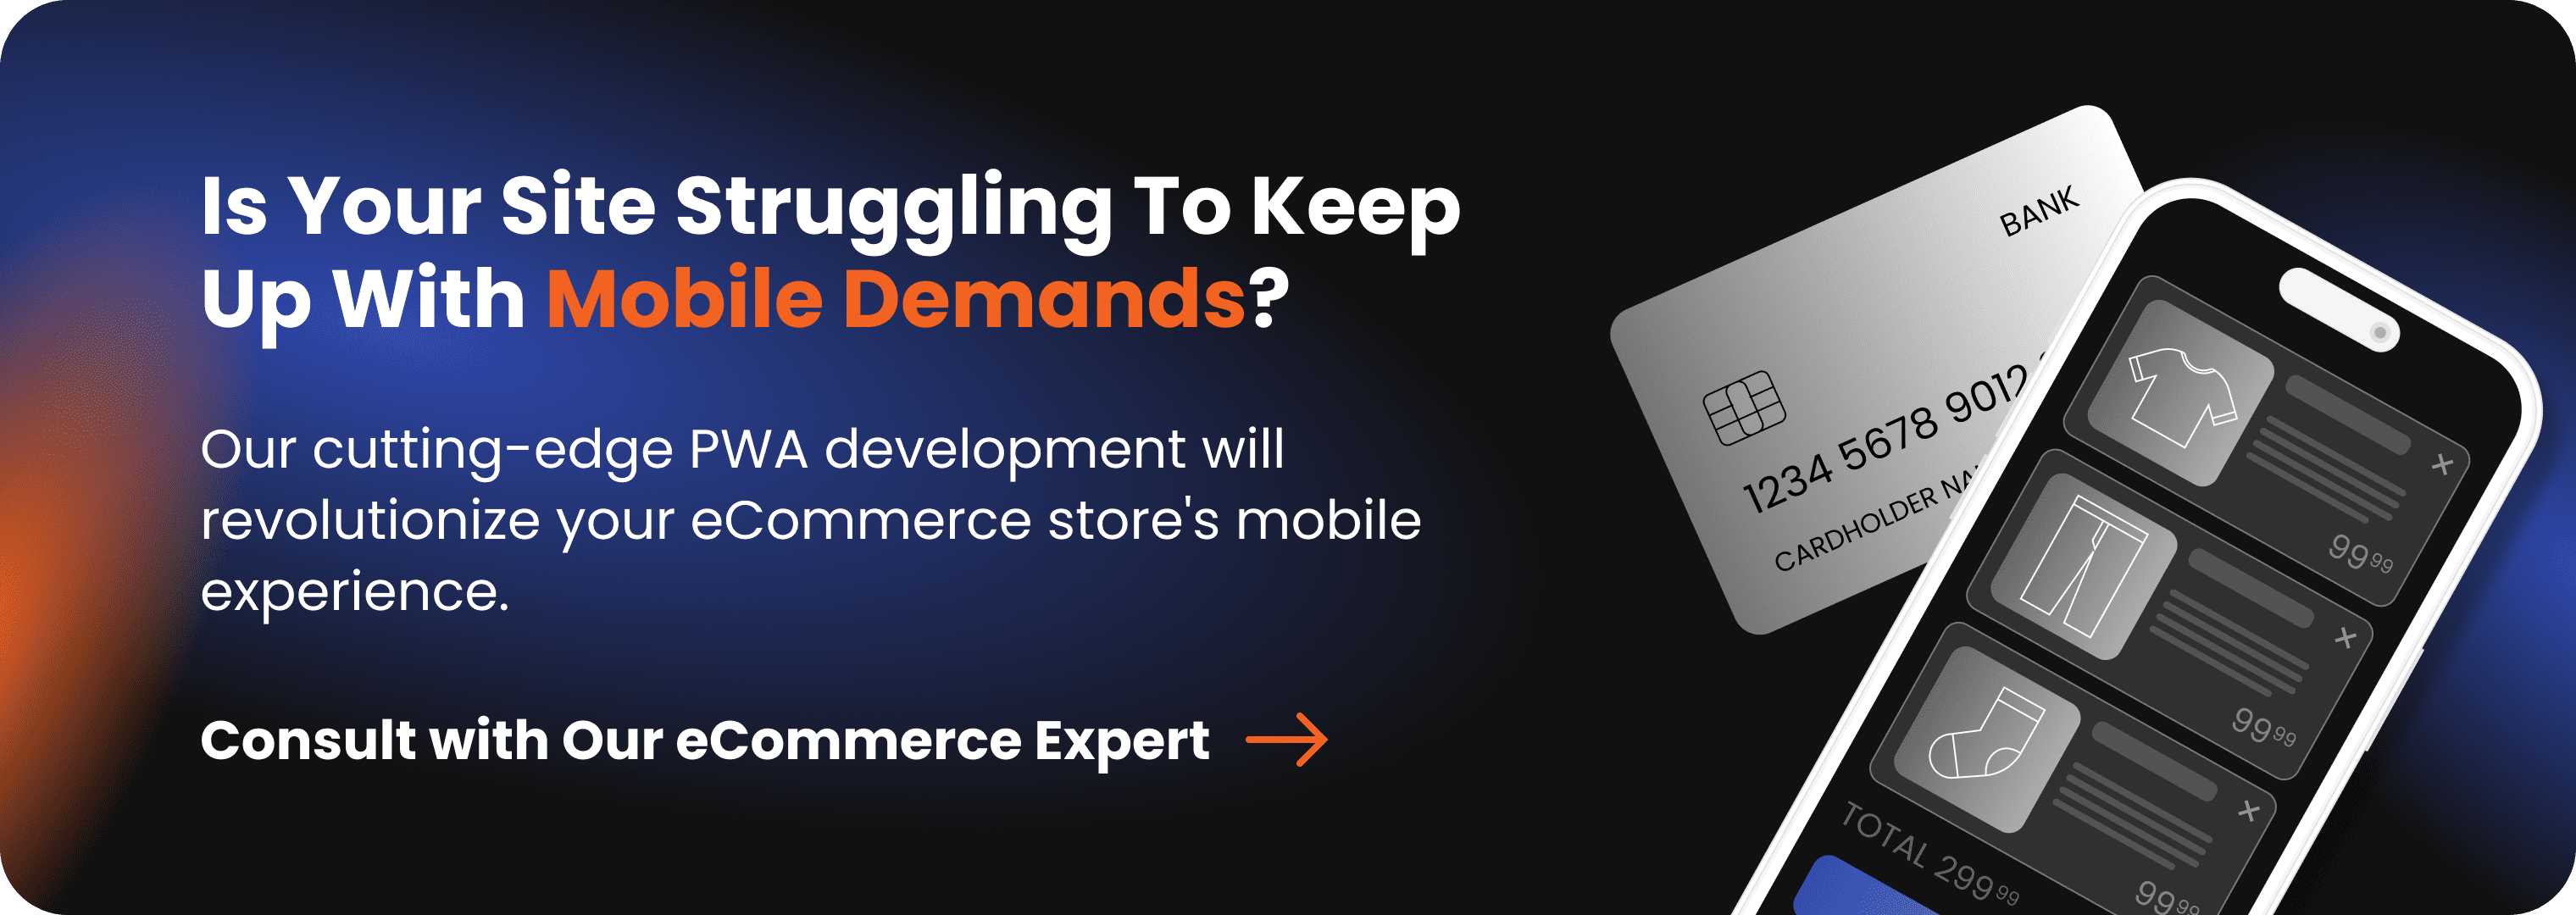 Mobile - Is your site struggling to keep up with mobile demands_